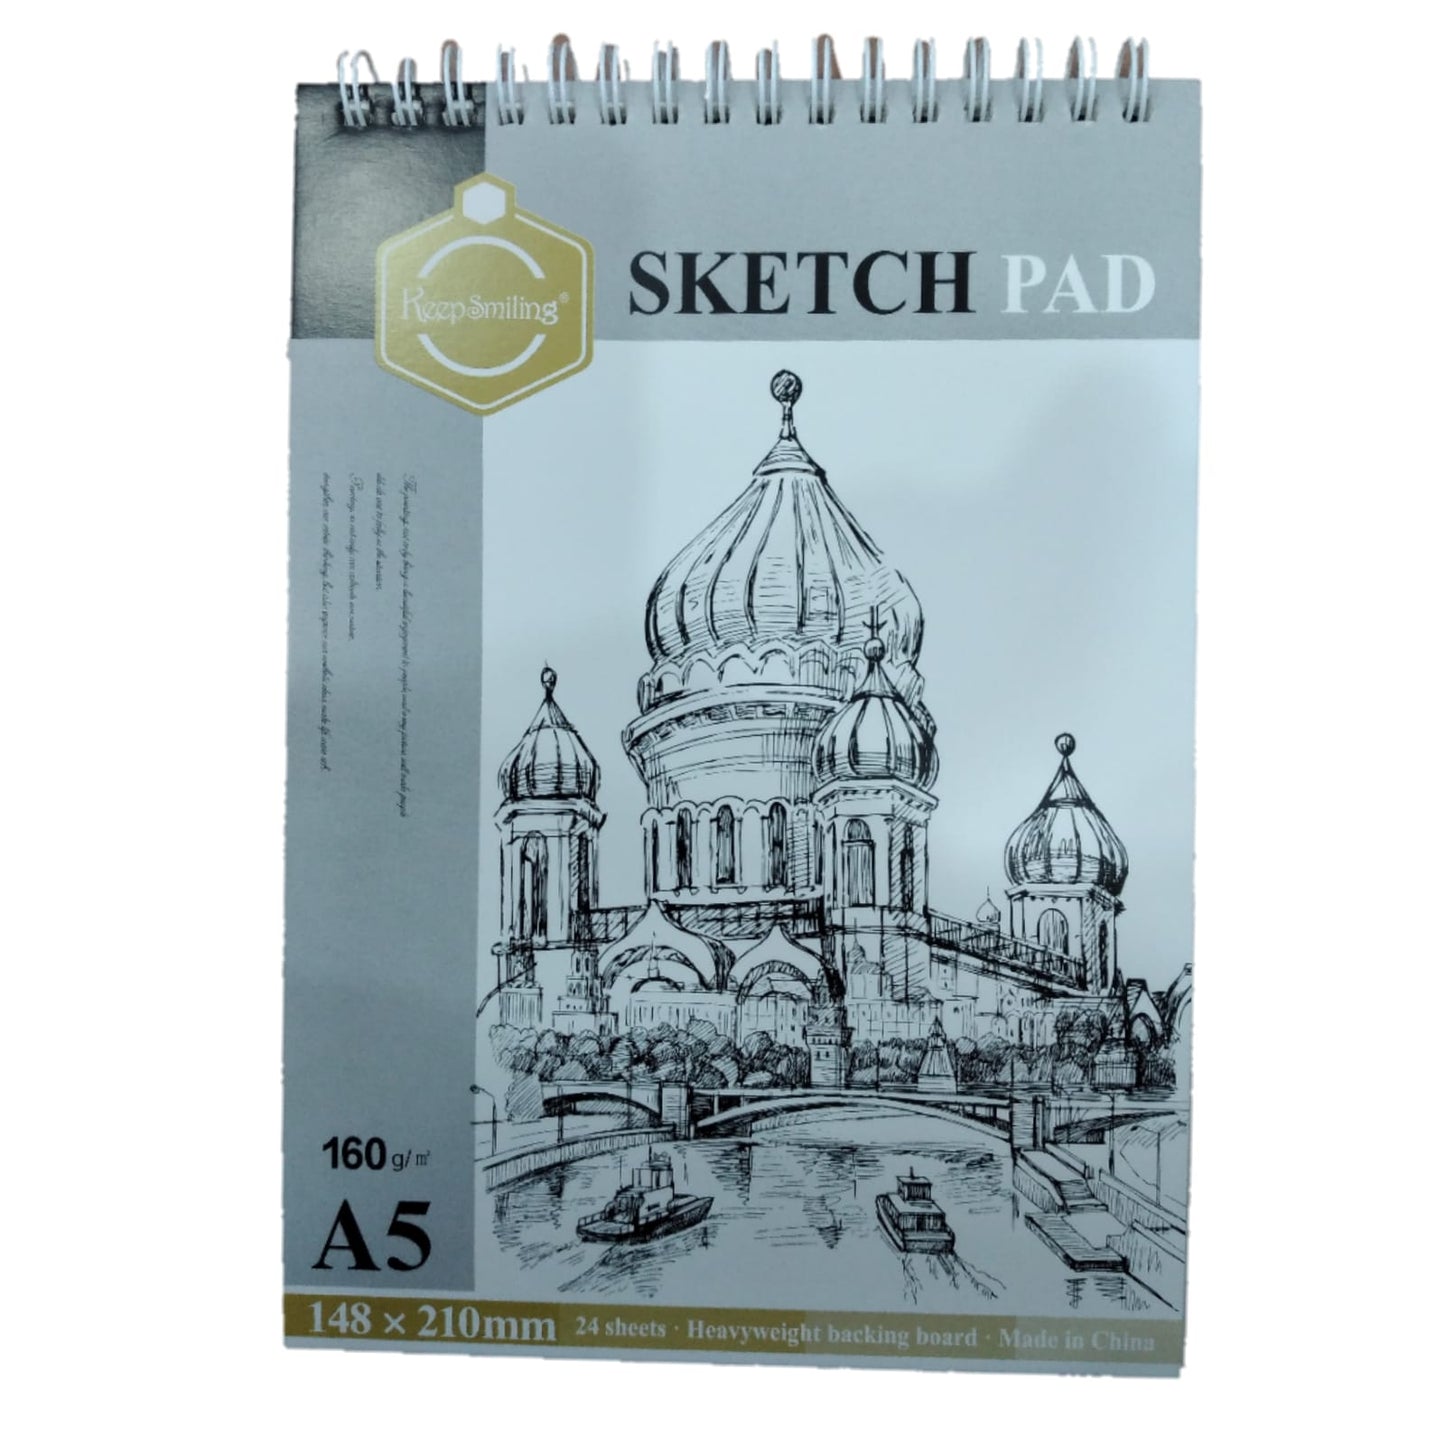 keep smiling sketch pad a5 size